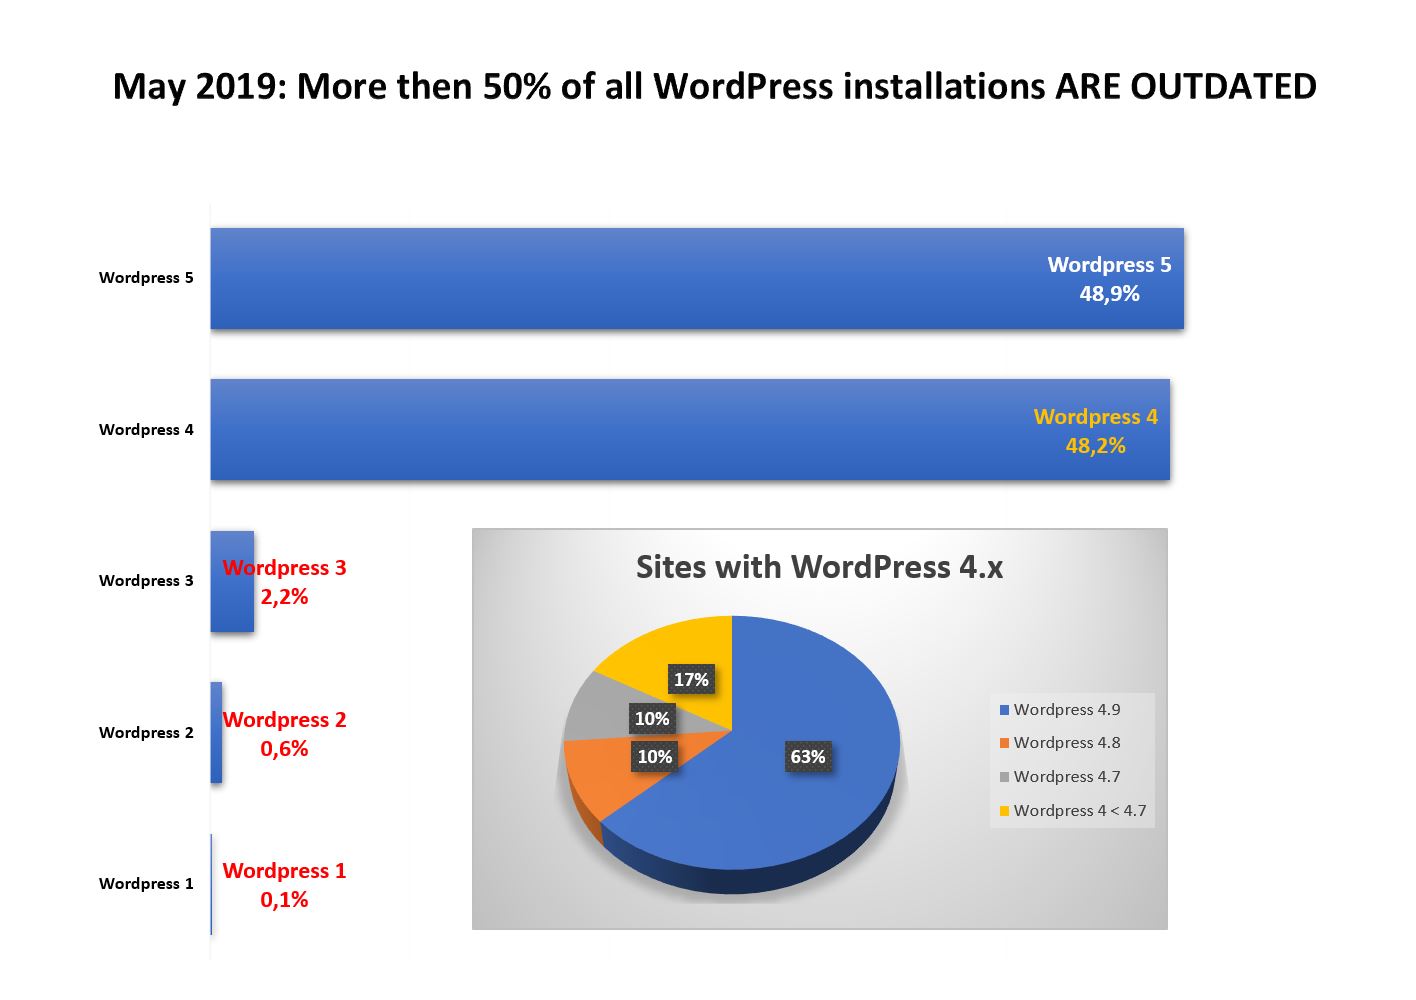 Over 50% of all WordPress installations are outdated.